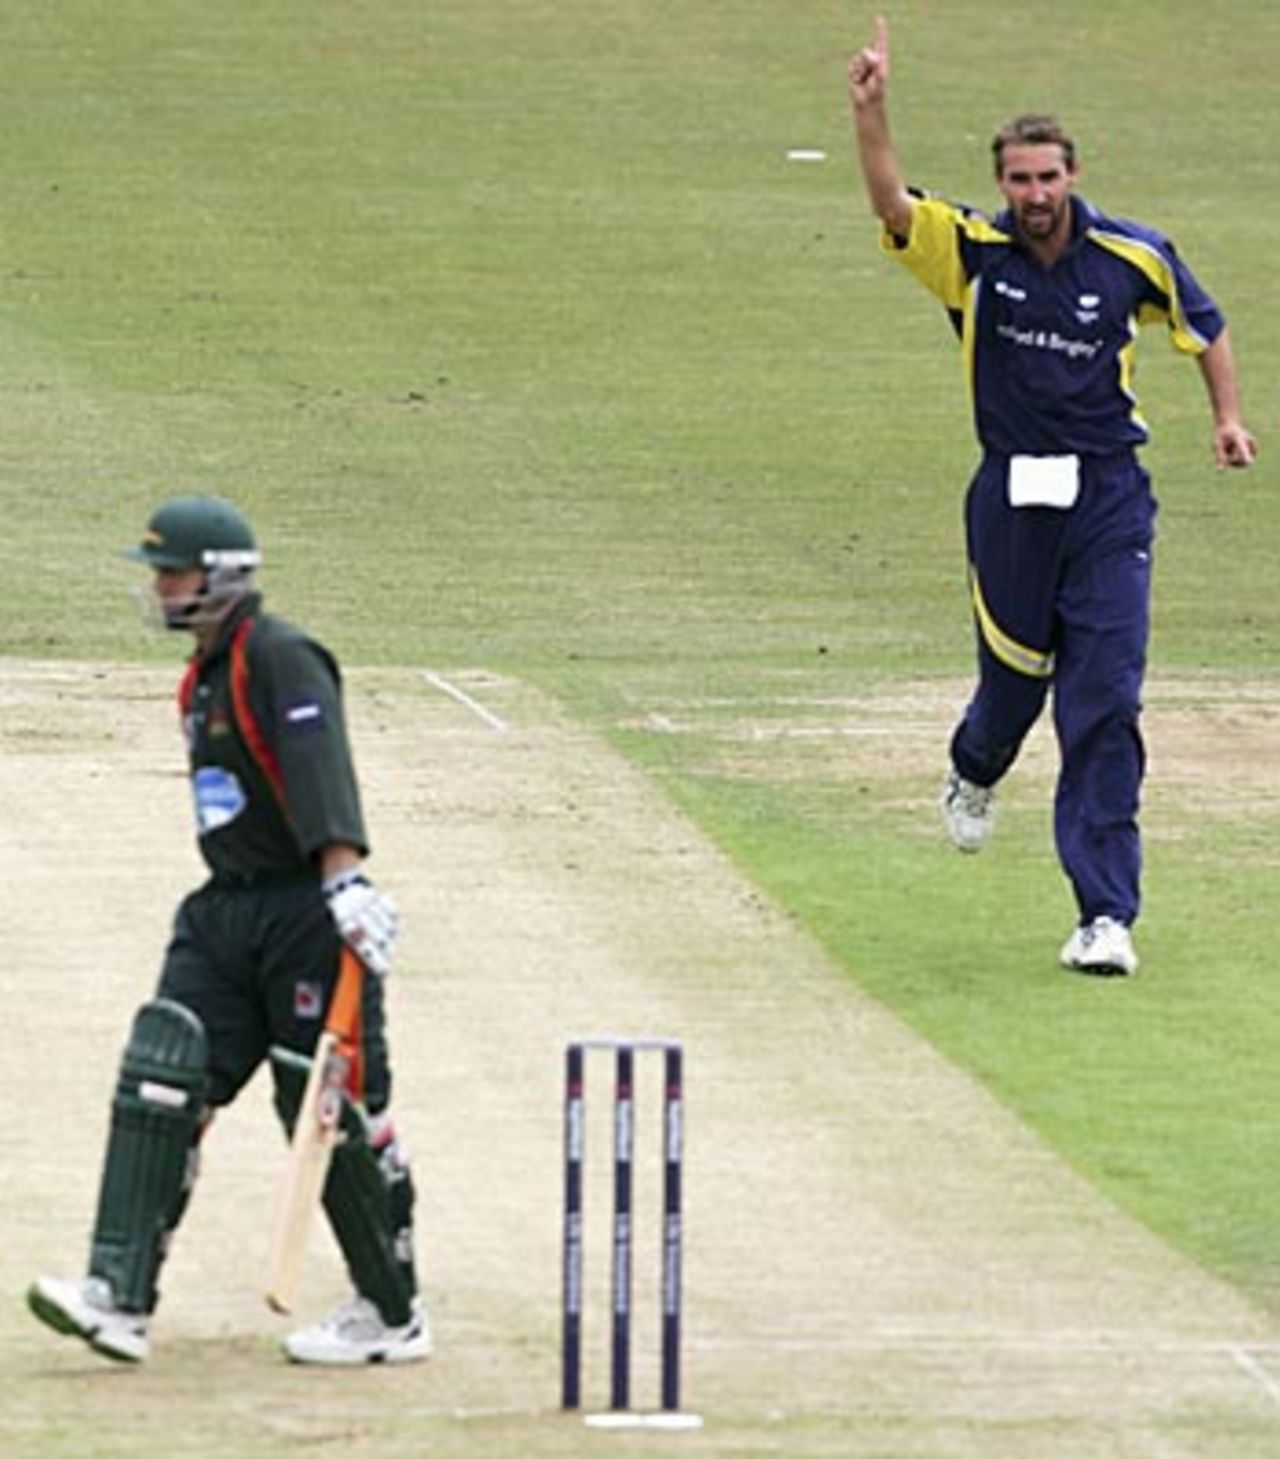 Jason Gillespie has Darren Maddy caught behind, Yorkshire v Leicestershire, Pro40, Scarborough, July 23, 2006